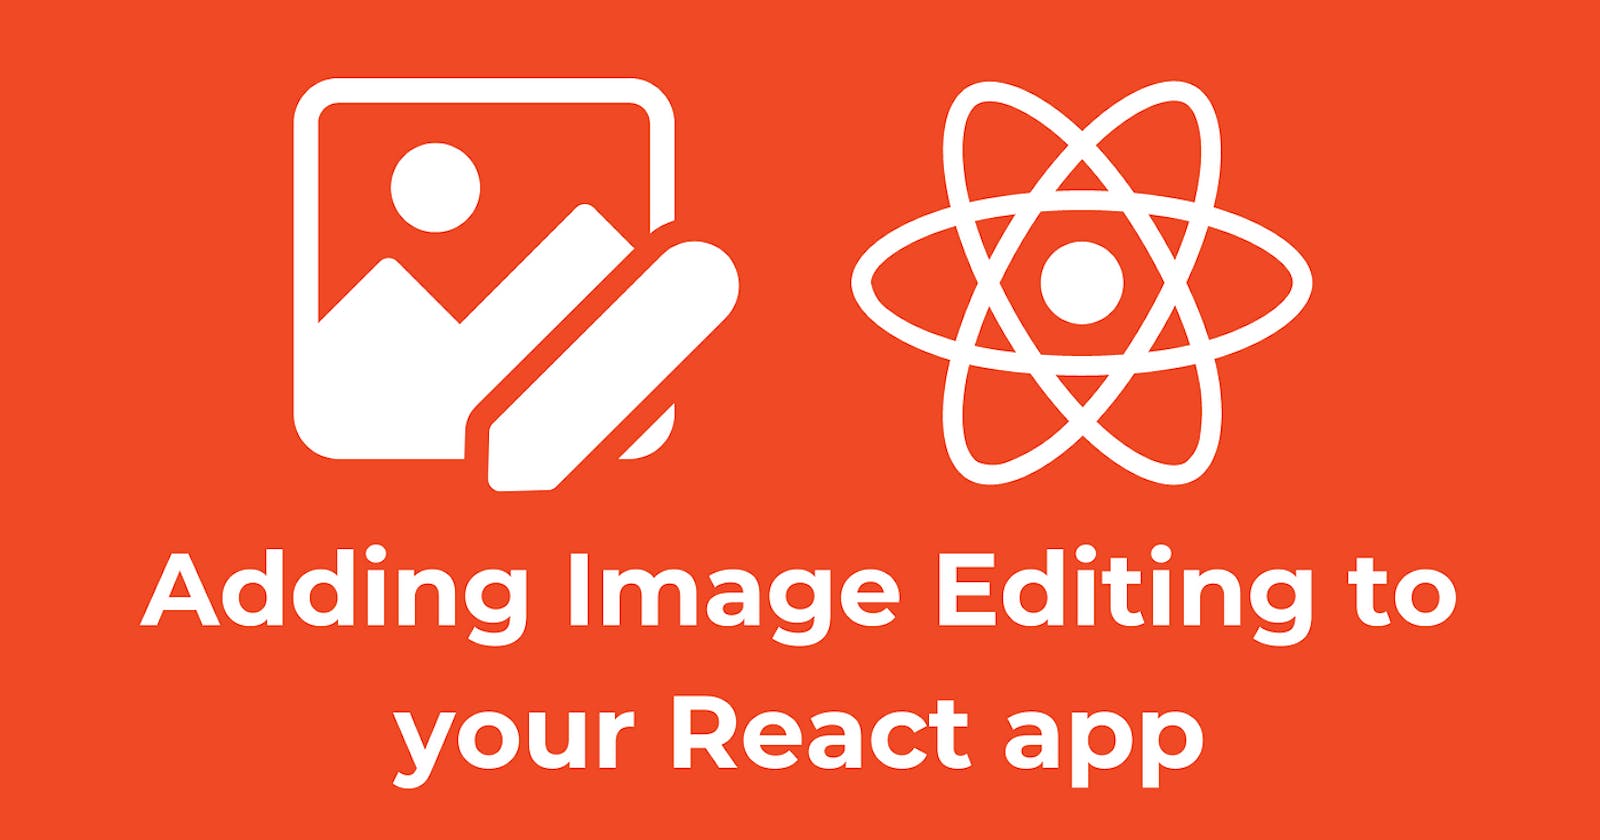 Enhance Your React Apps with Image Editing Capabilities